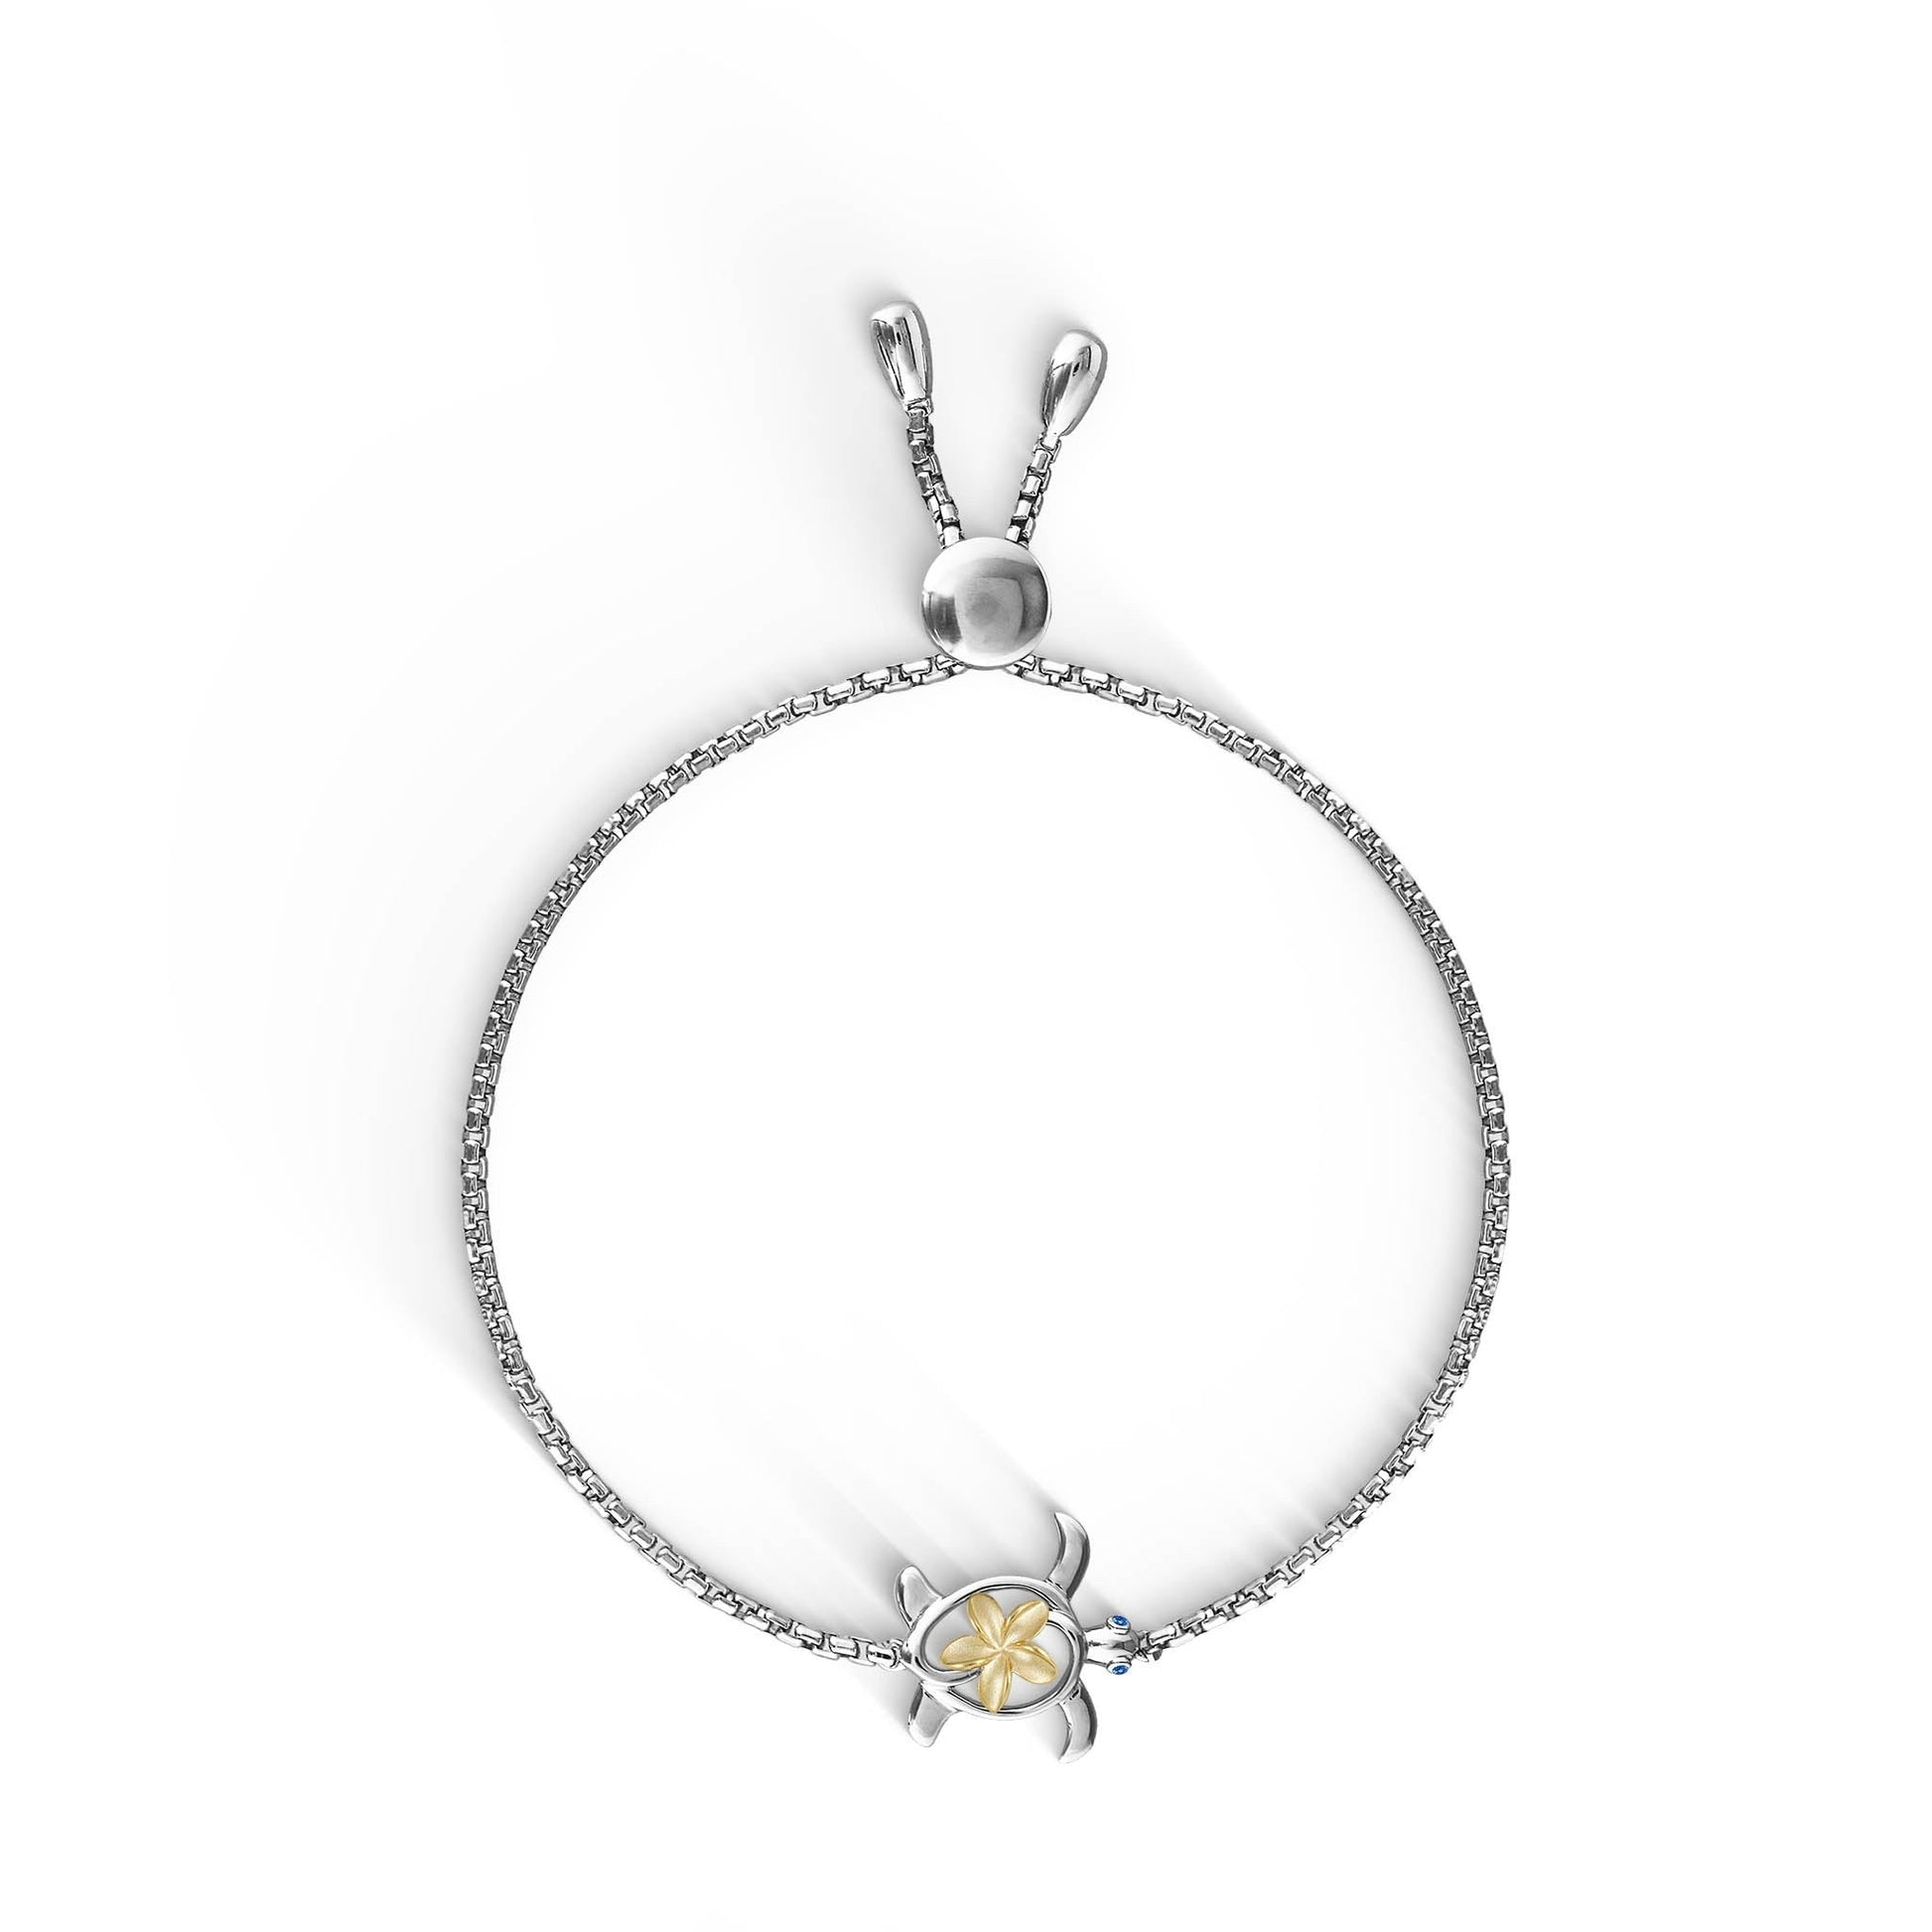 44396 - 14K Yellow Gold and Sterling Silver - Honu and Plumeria Adjustable Bolo Bracelet